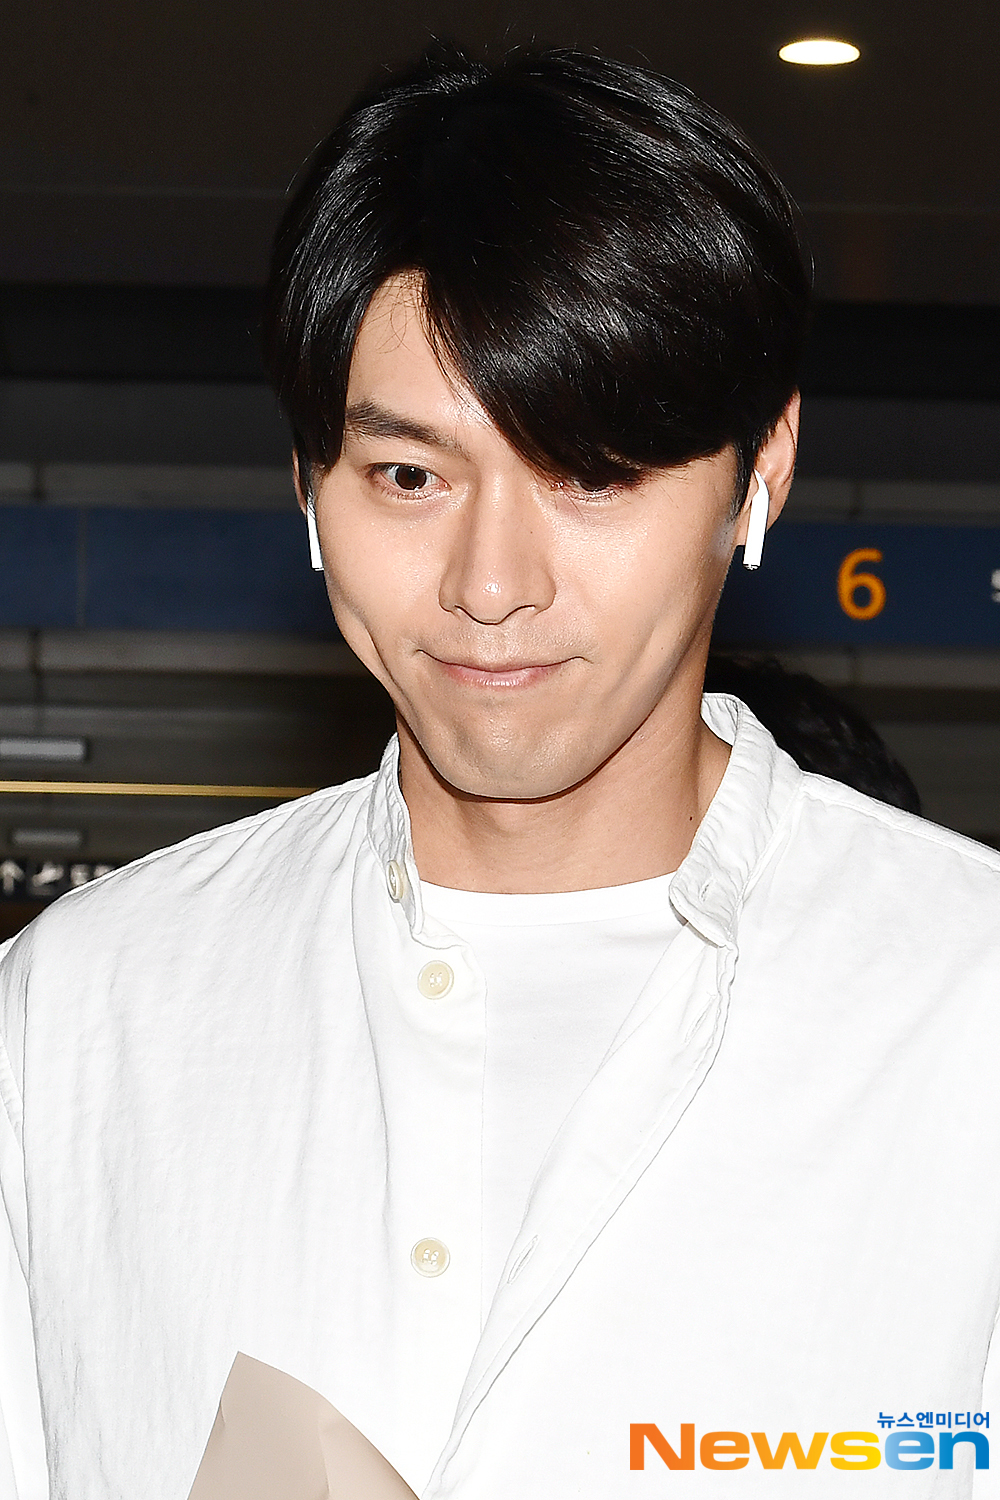 Actor Hyun Bin arrived in Hong Kong through Incheon International Airport in Unseo-dong, Jung-gu, Incheon on the afternoon of May 12 after completing the schedule of the LOG INTO THE SPACE -2019 Hyun Bin Fan Meeting Tour - in Hong Kong.Actor Hyun Bin is entering the country with an airport fashion.exponential earthquake